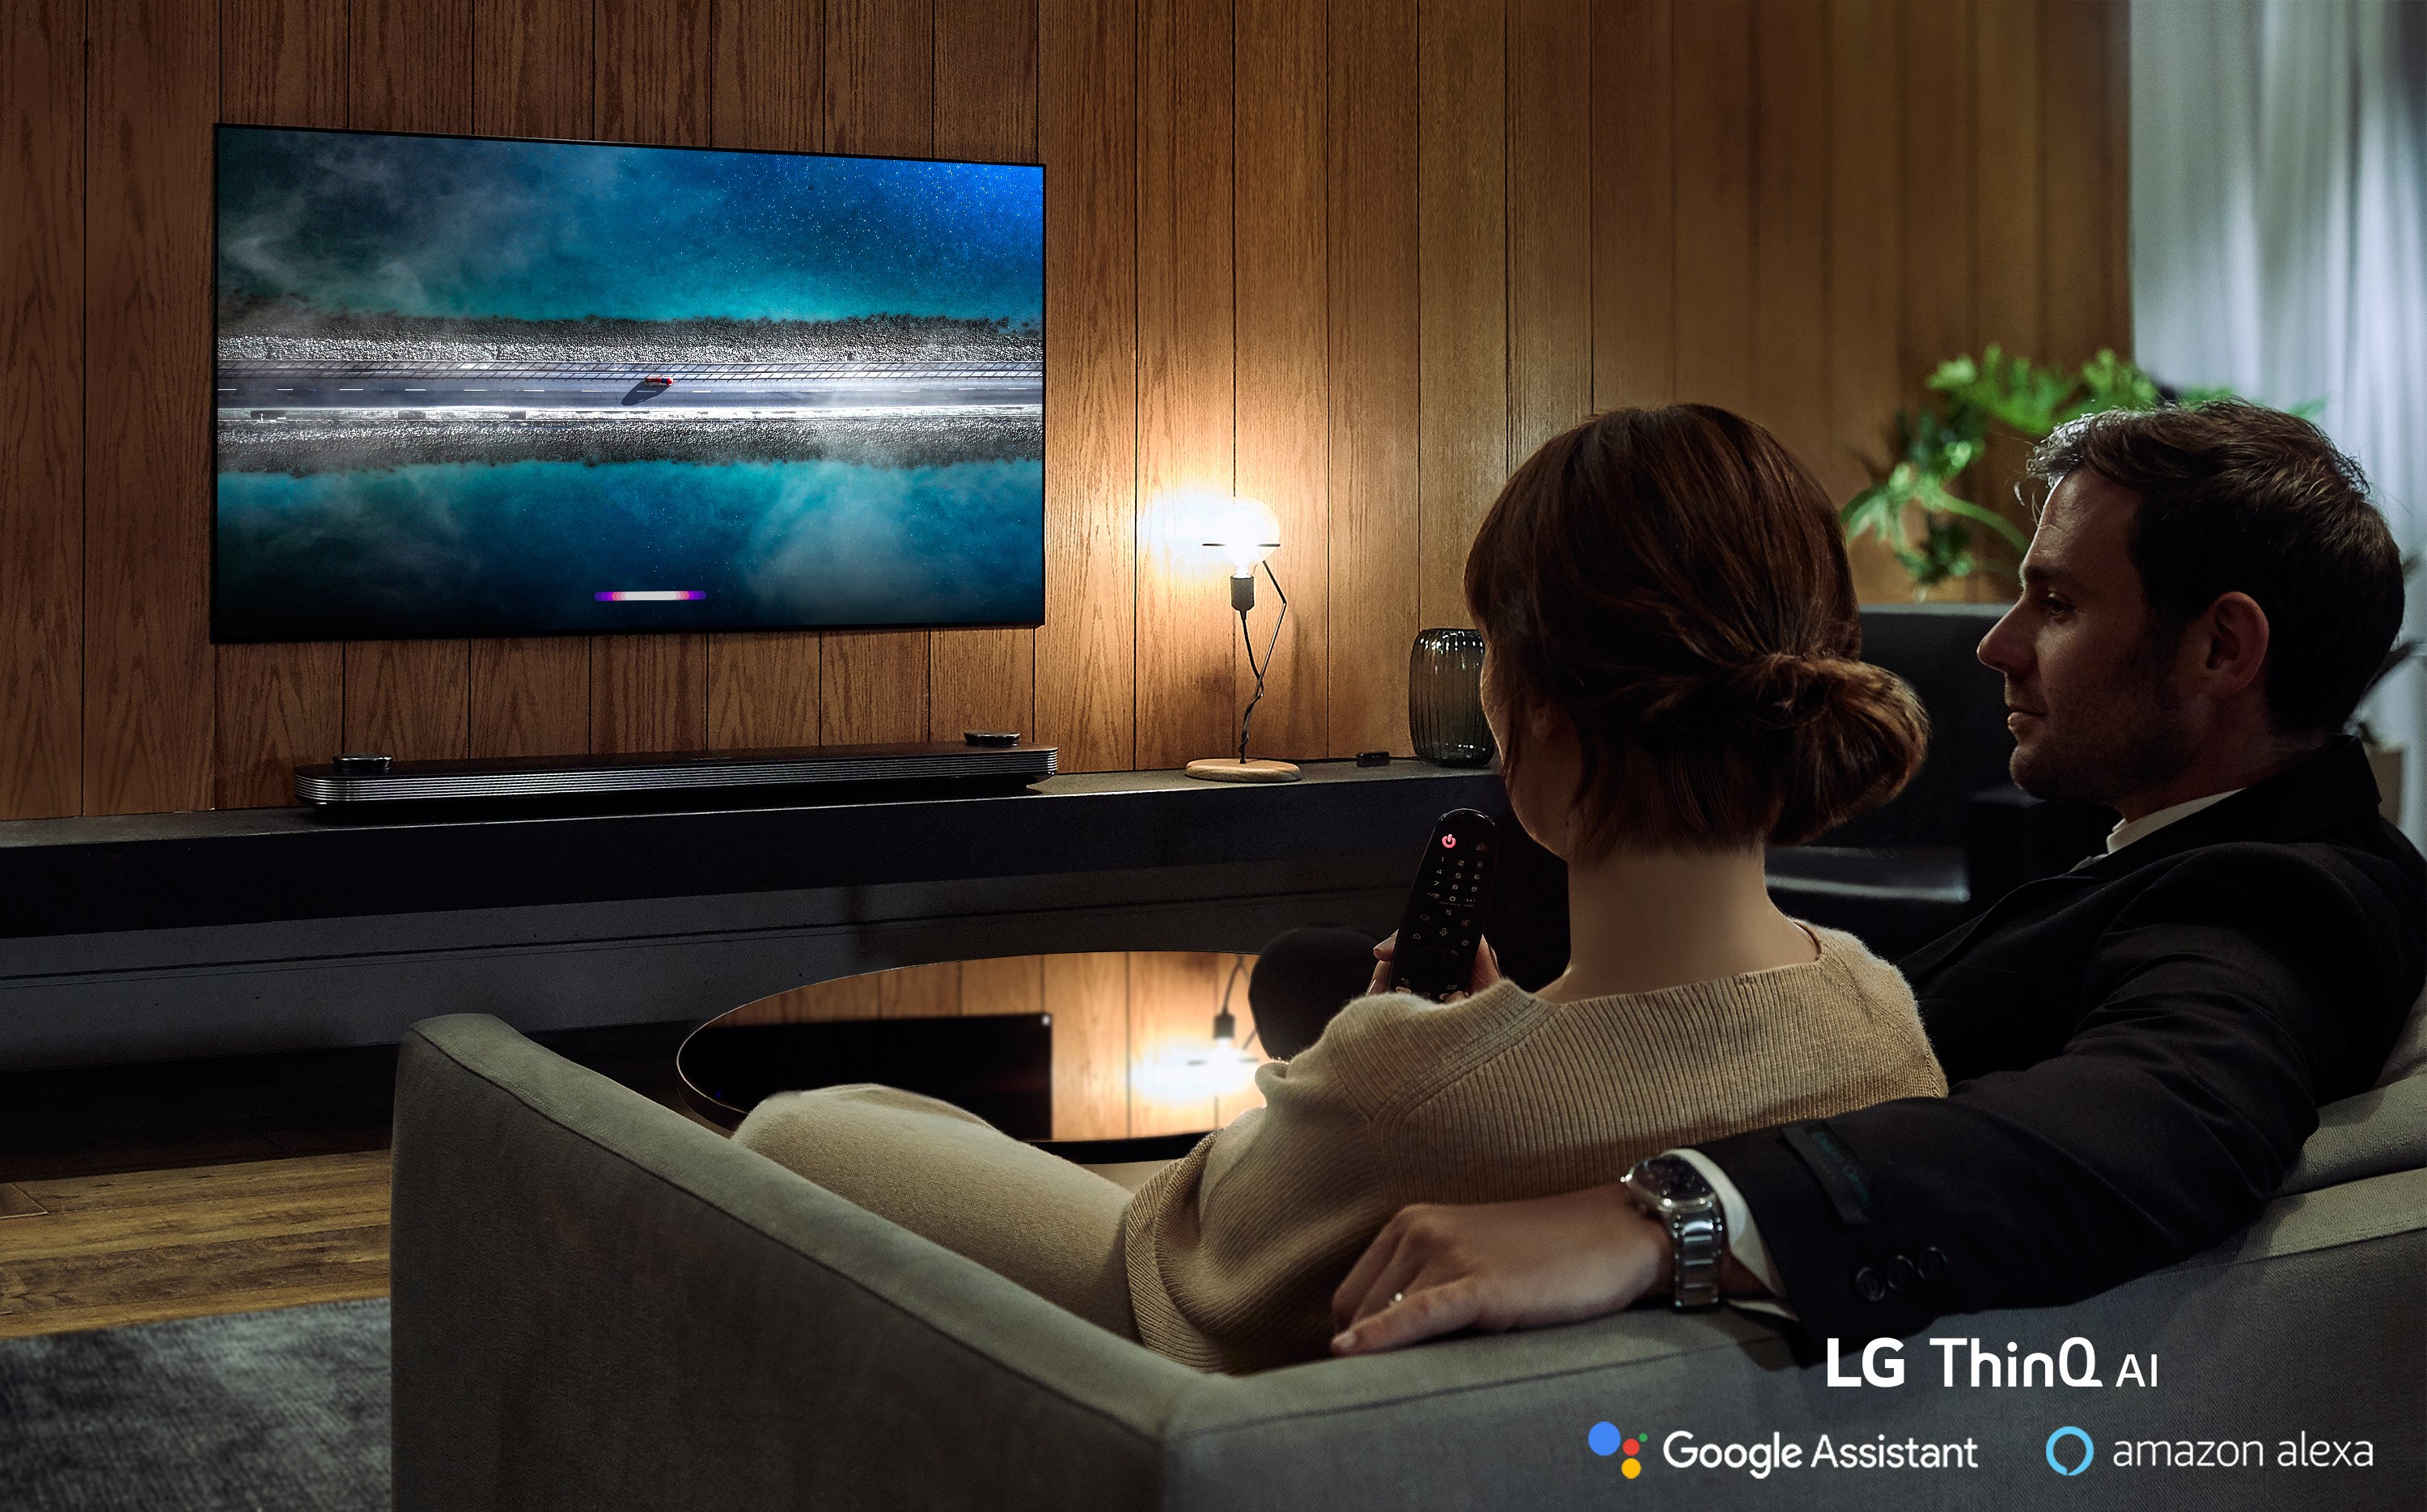 A couple is watching an LG TV supporting Amazon Alexa while the woman holds the remote in one hand